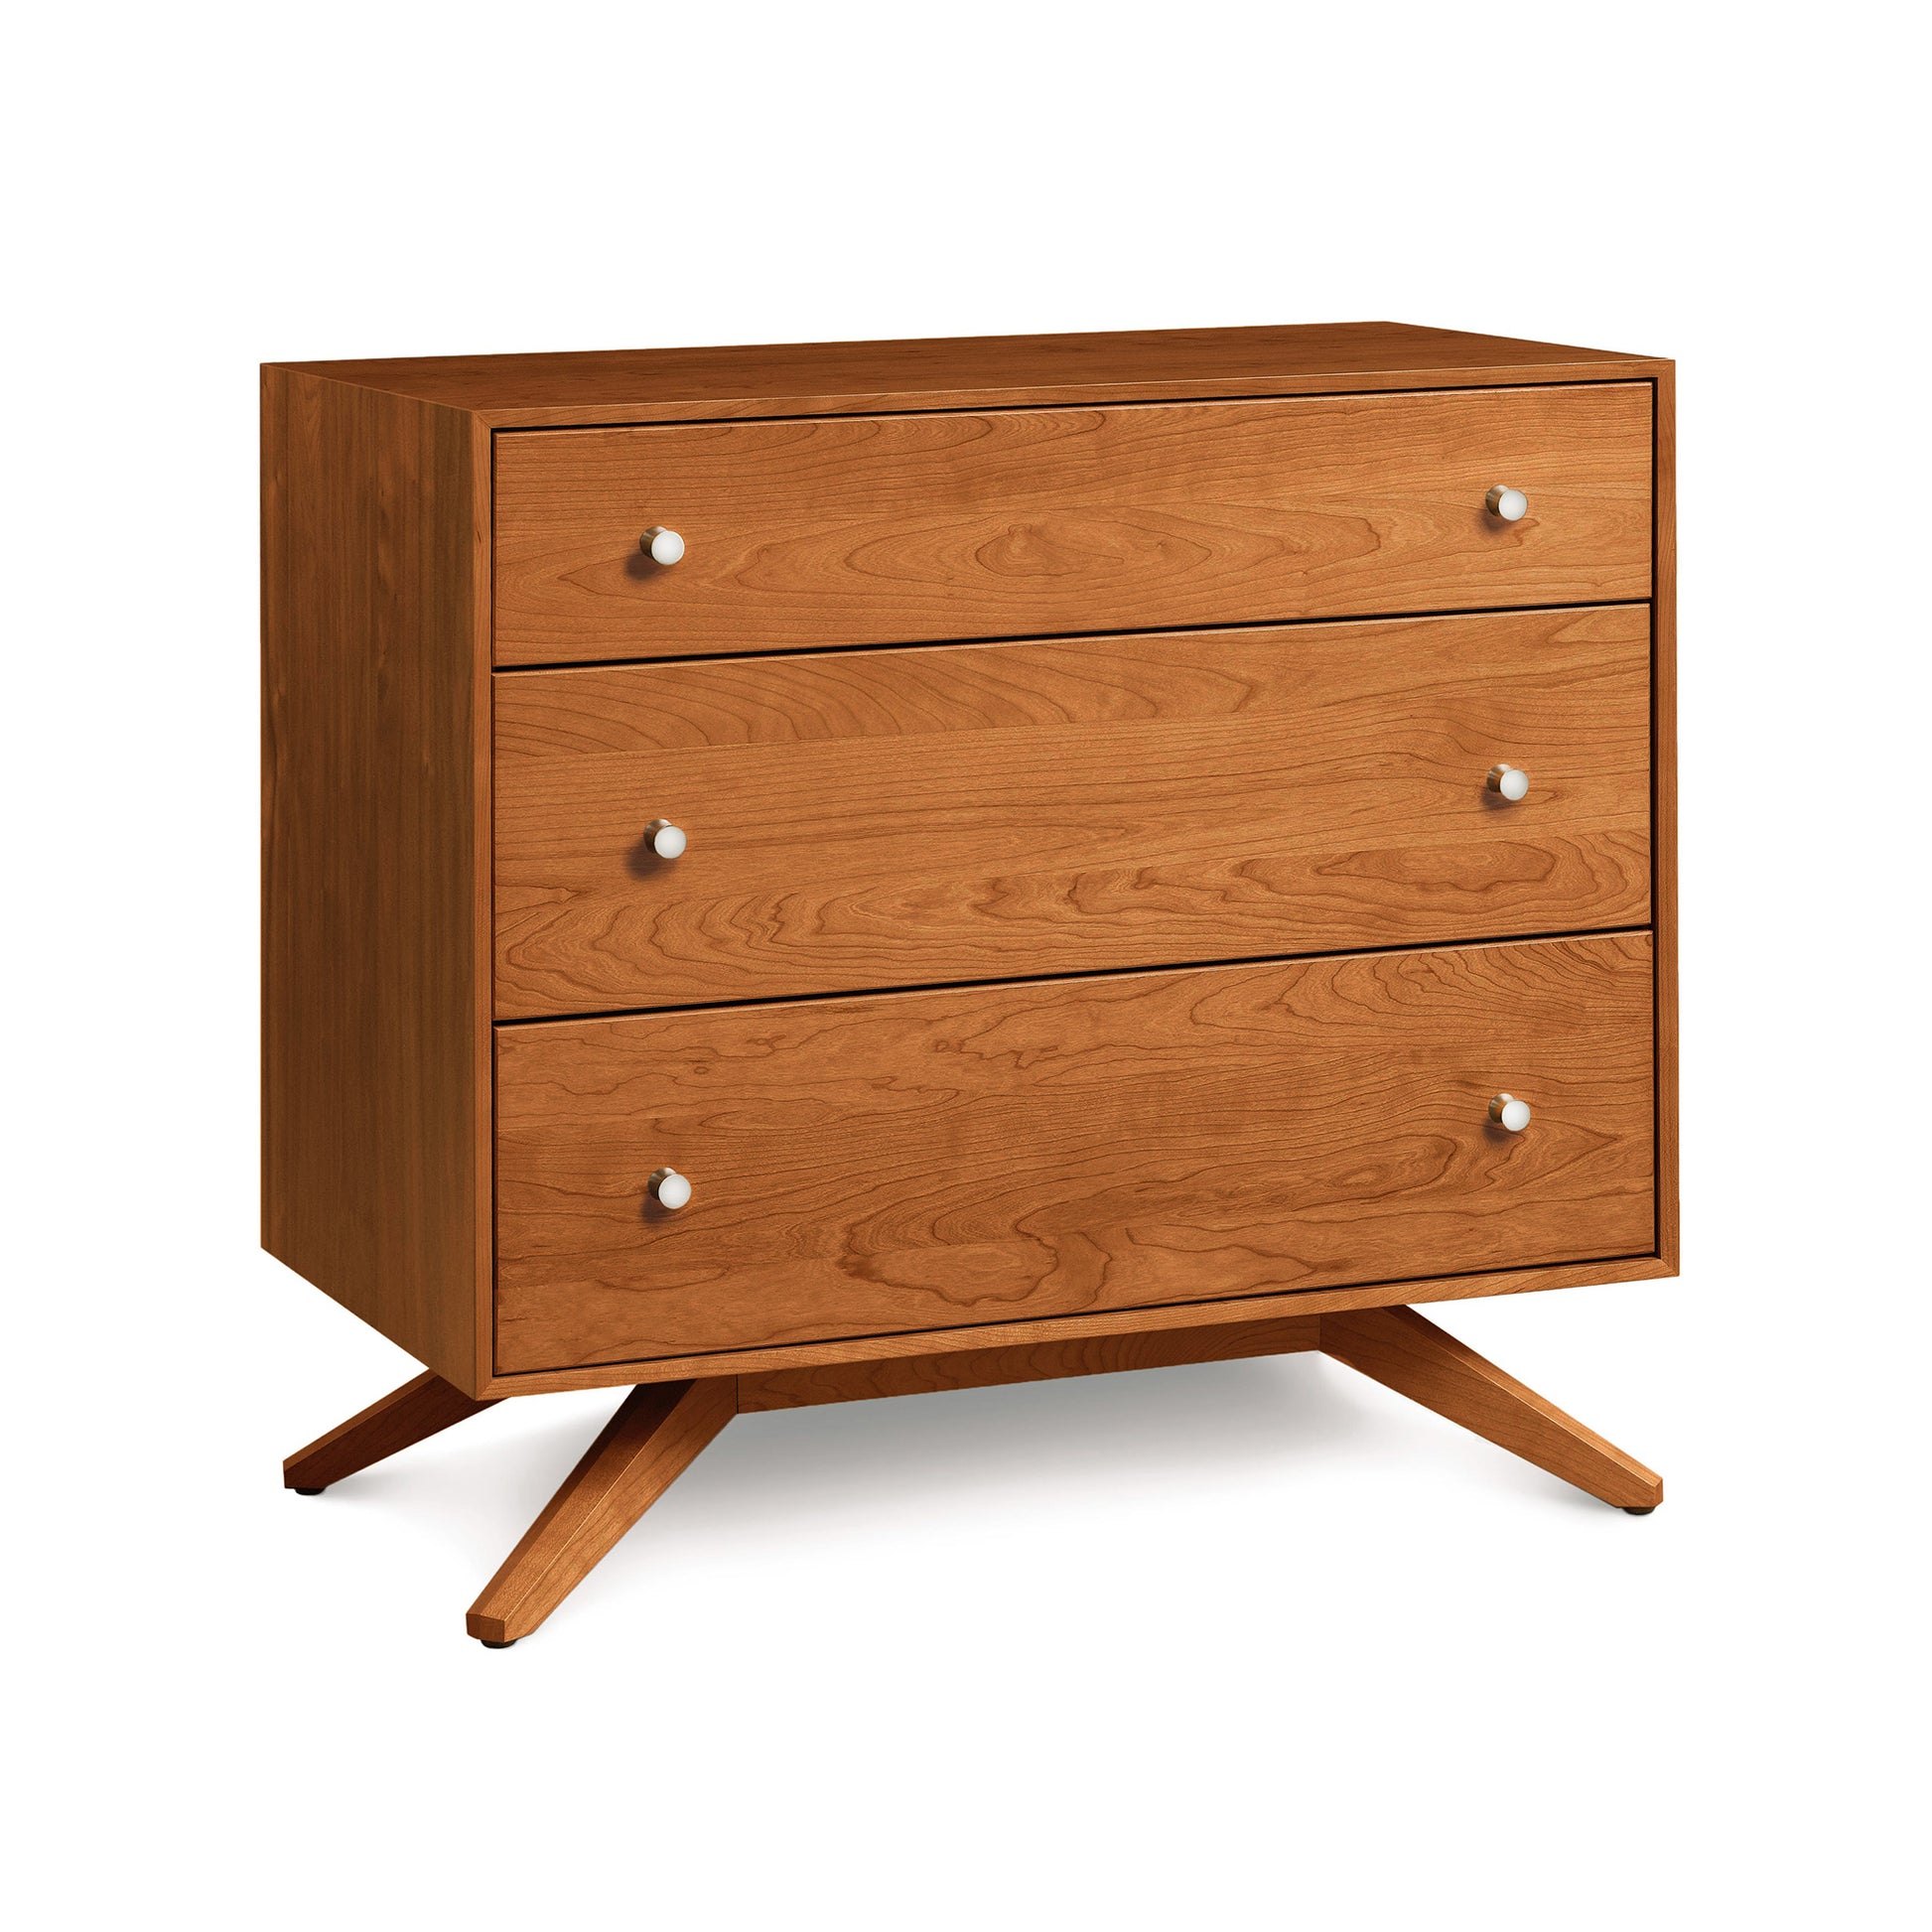 The Astrid 3-Drawer Chest, made by Copeland Furniture, is displayed on a white background.